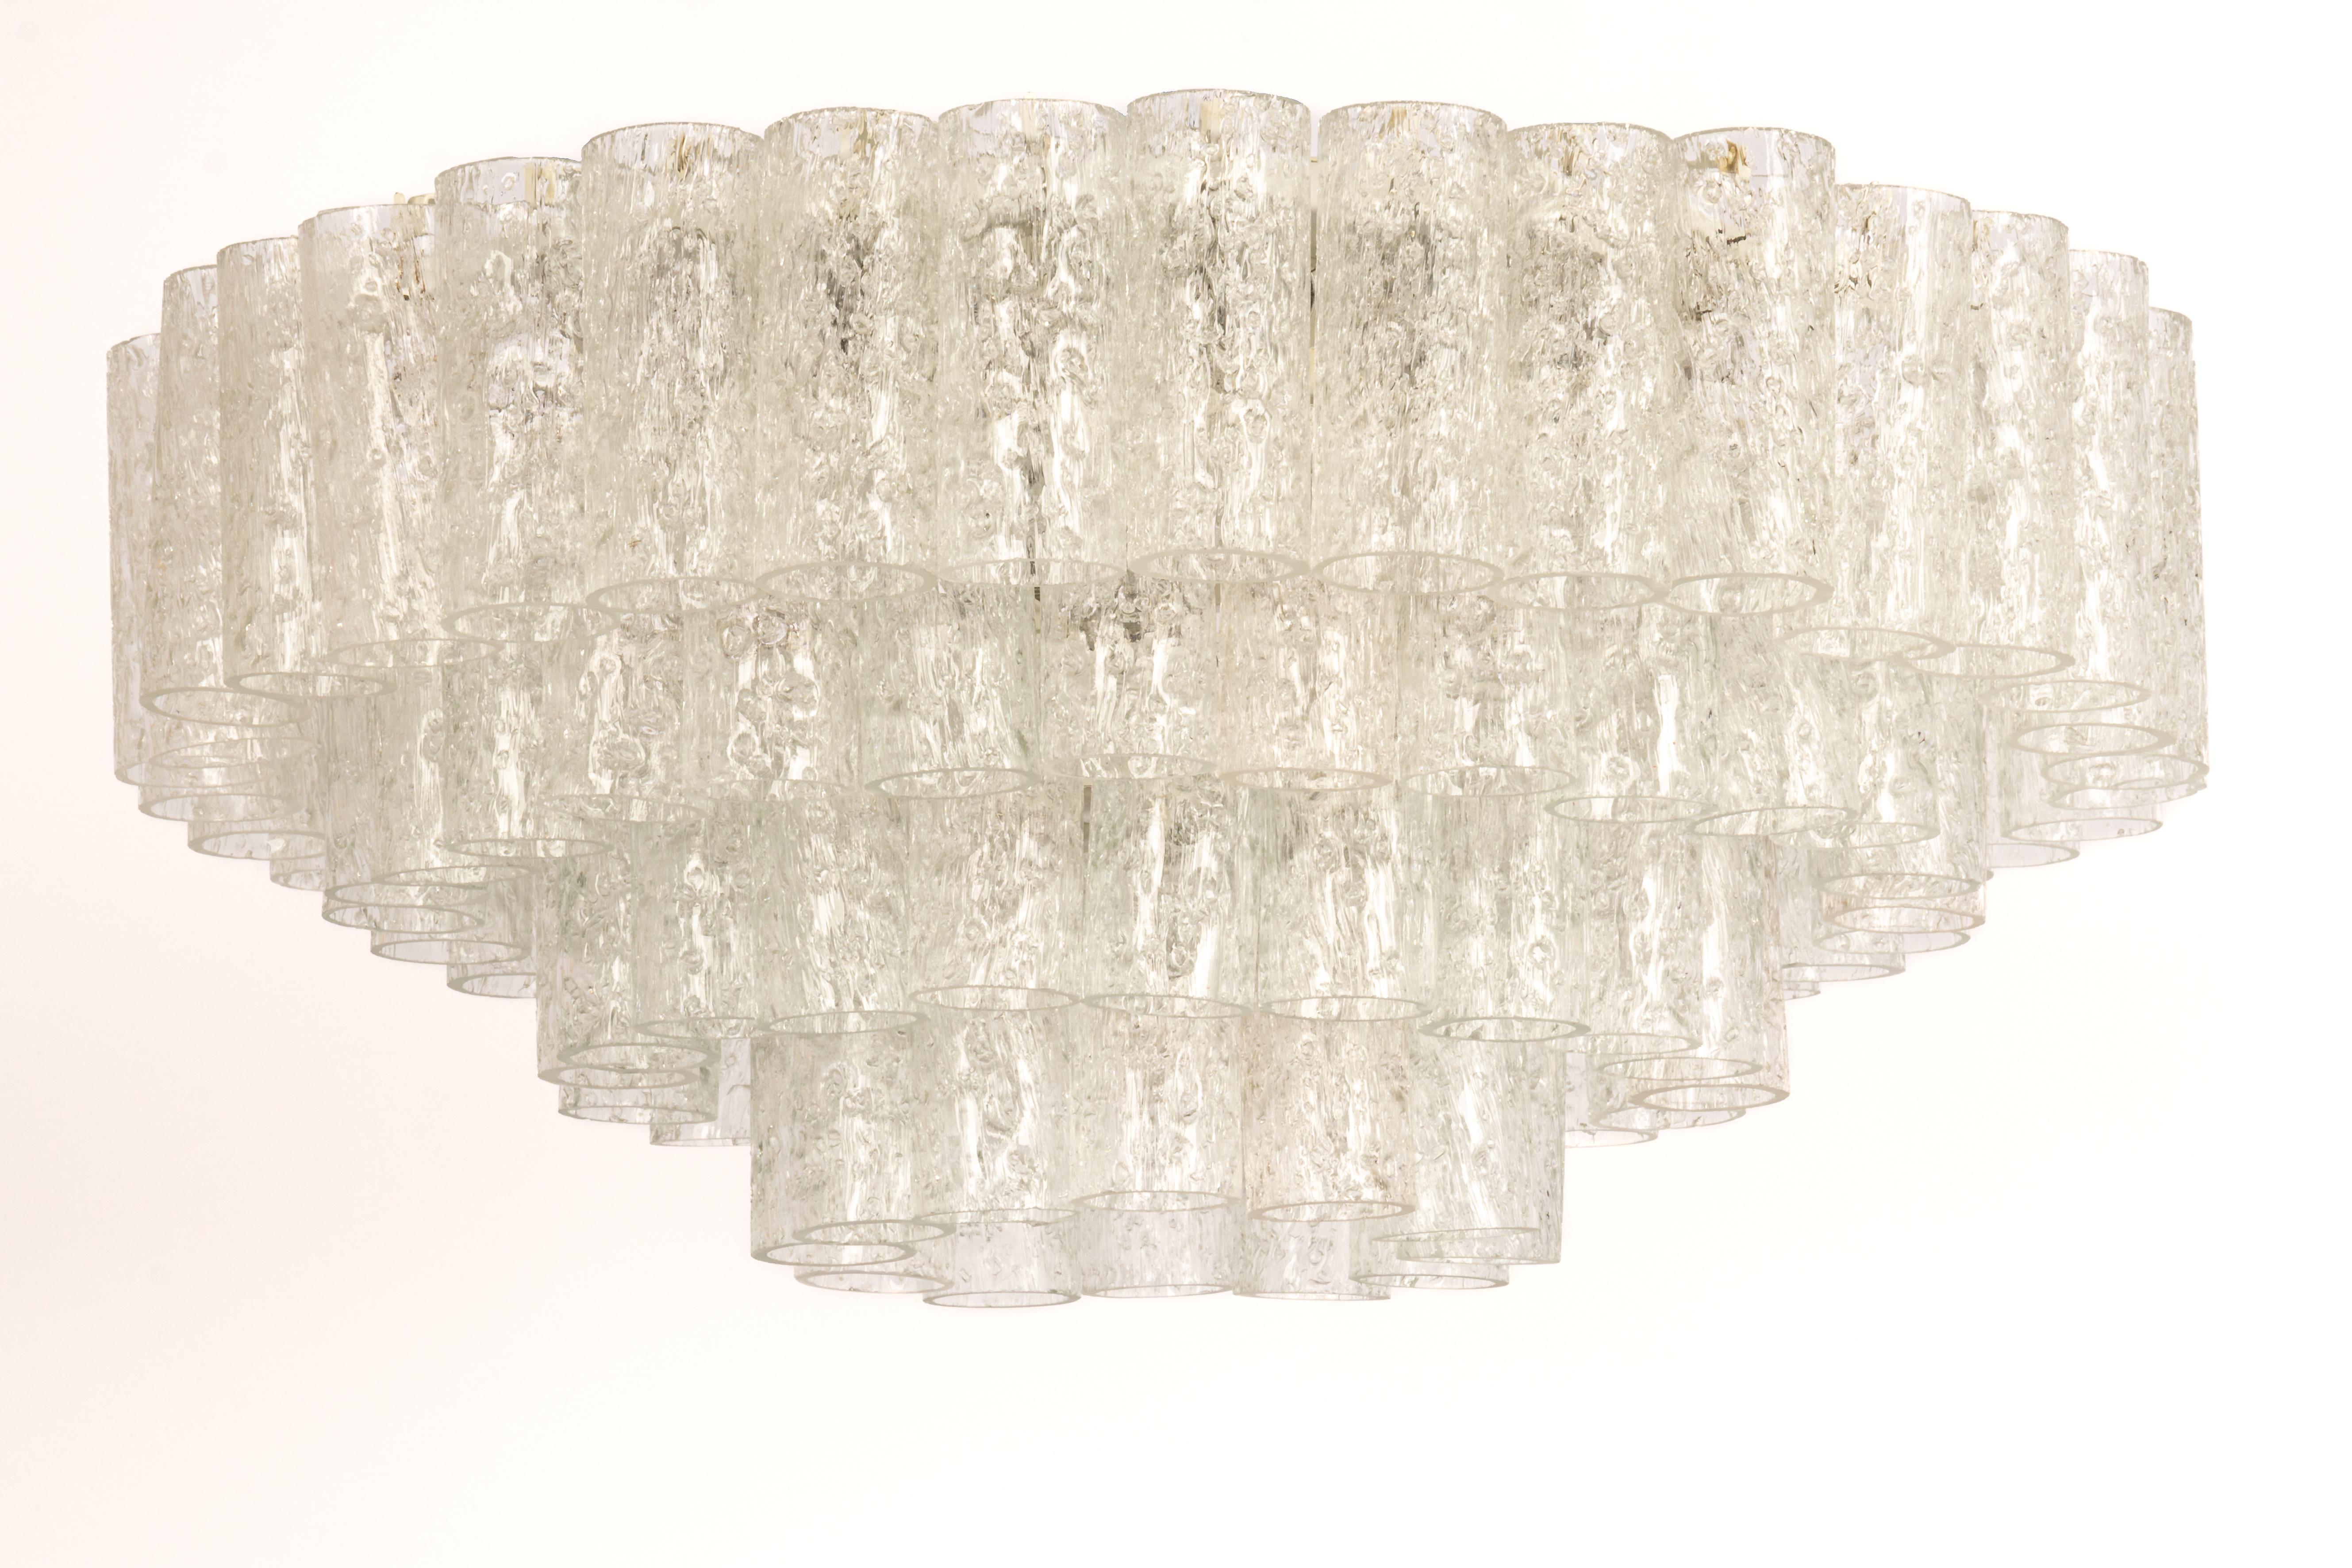 Fantastic four-tier midcentury chandelier by Doria, Germany, manufactured circa 1960-1969. 4 rings of Murano glass cylinders suspended from a fixture.

Sockets: 10 x E14 candelabra bulbs (up to 40 W each) .
Light bulbs are not included. It is